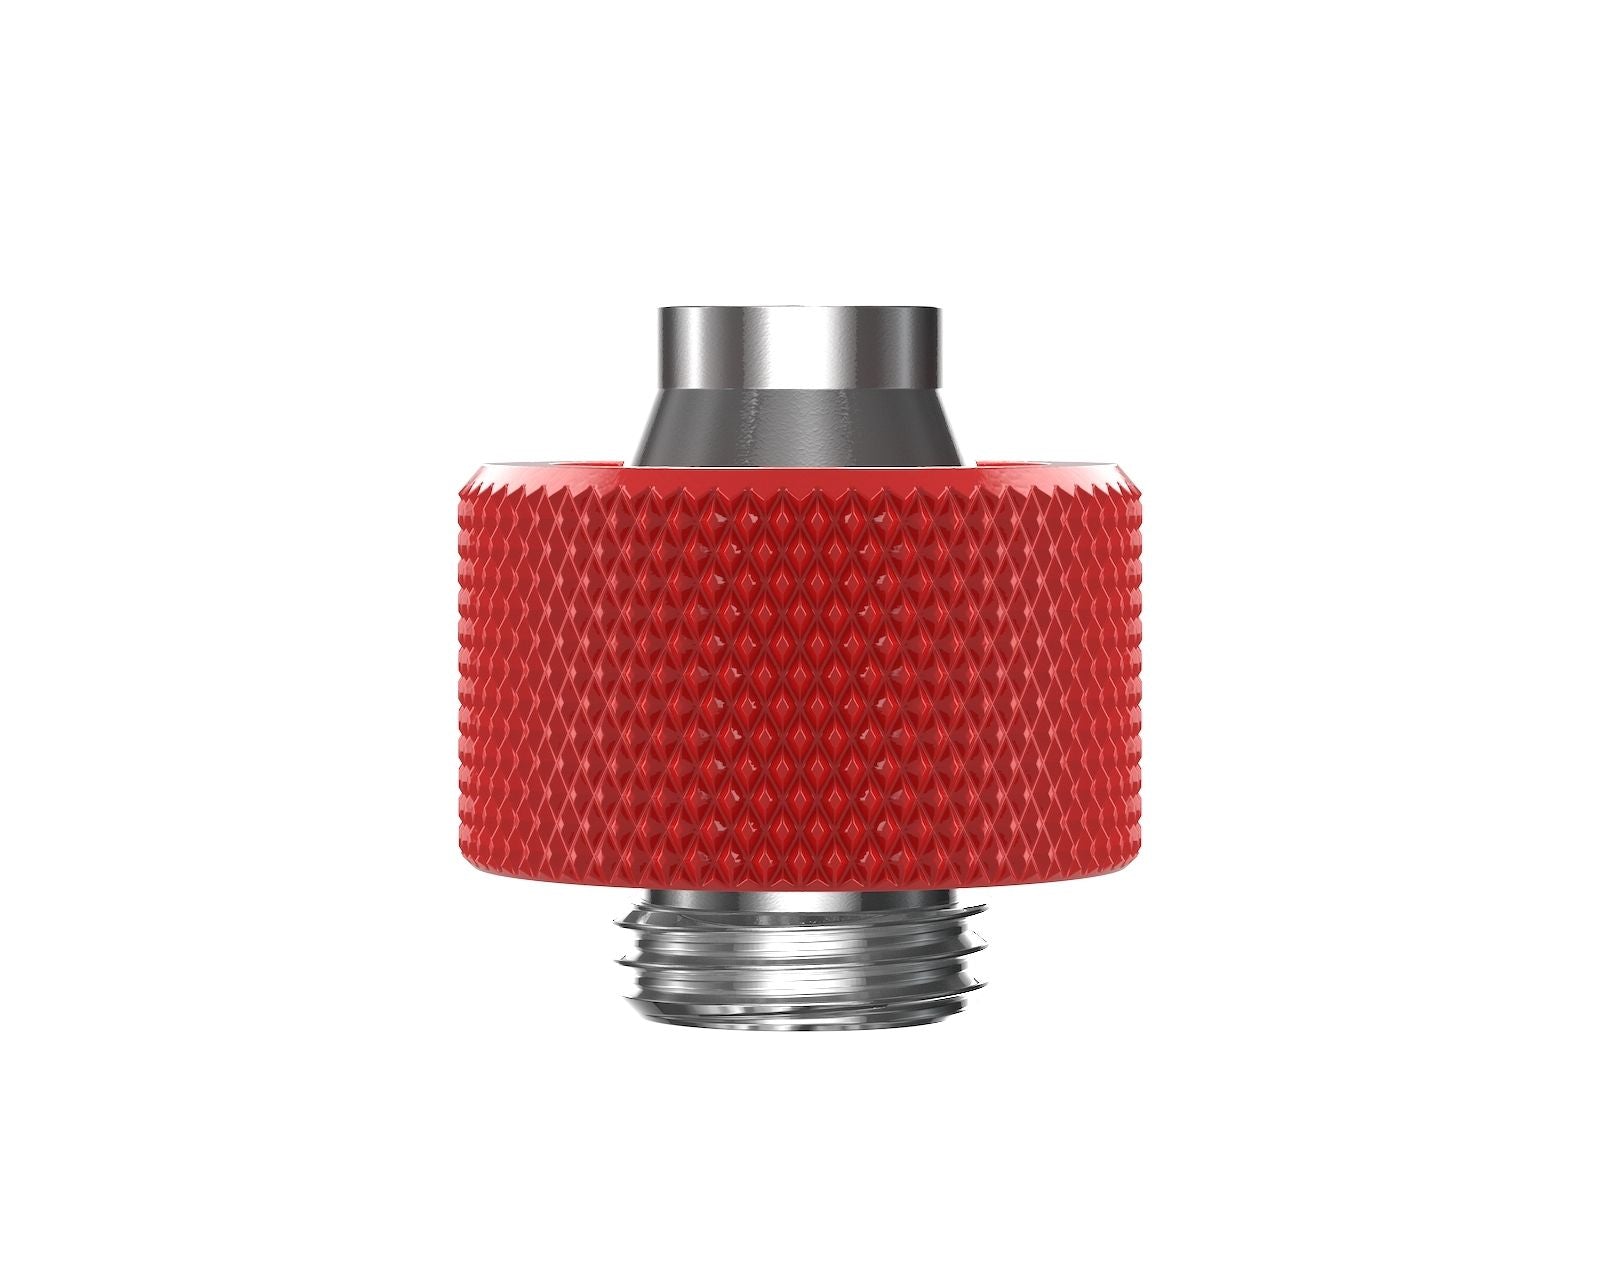 PrimoChill SecureFit SX - Premium Compression Fitting For 7/16in ID x 5/8in OD Flexible Tubing (F-SFSX758) - Available in 20+ Colors, Custom Watercooling Loop Ready - Razor Red